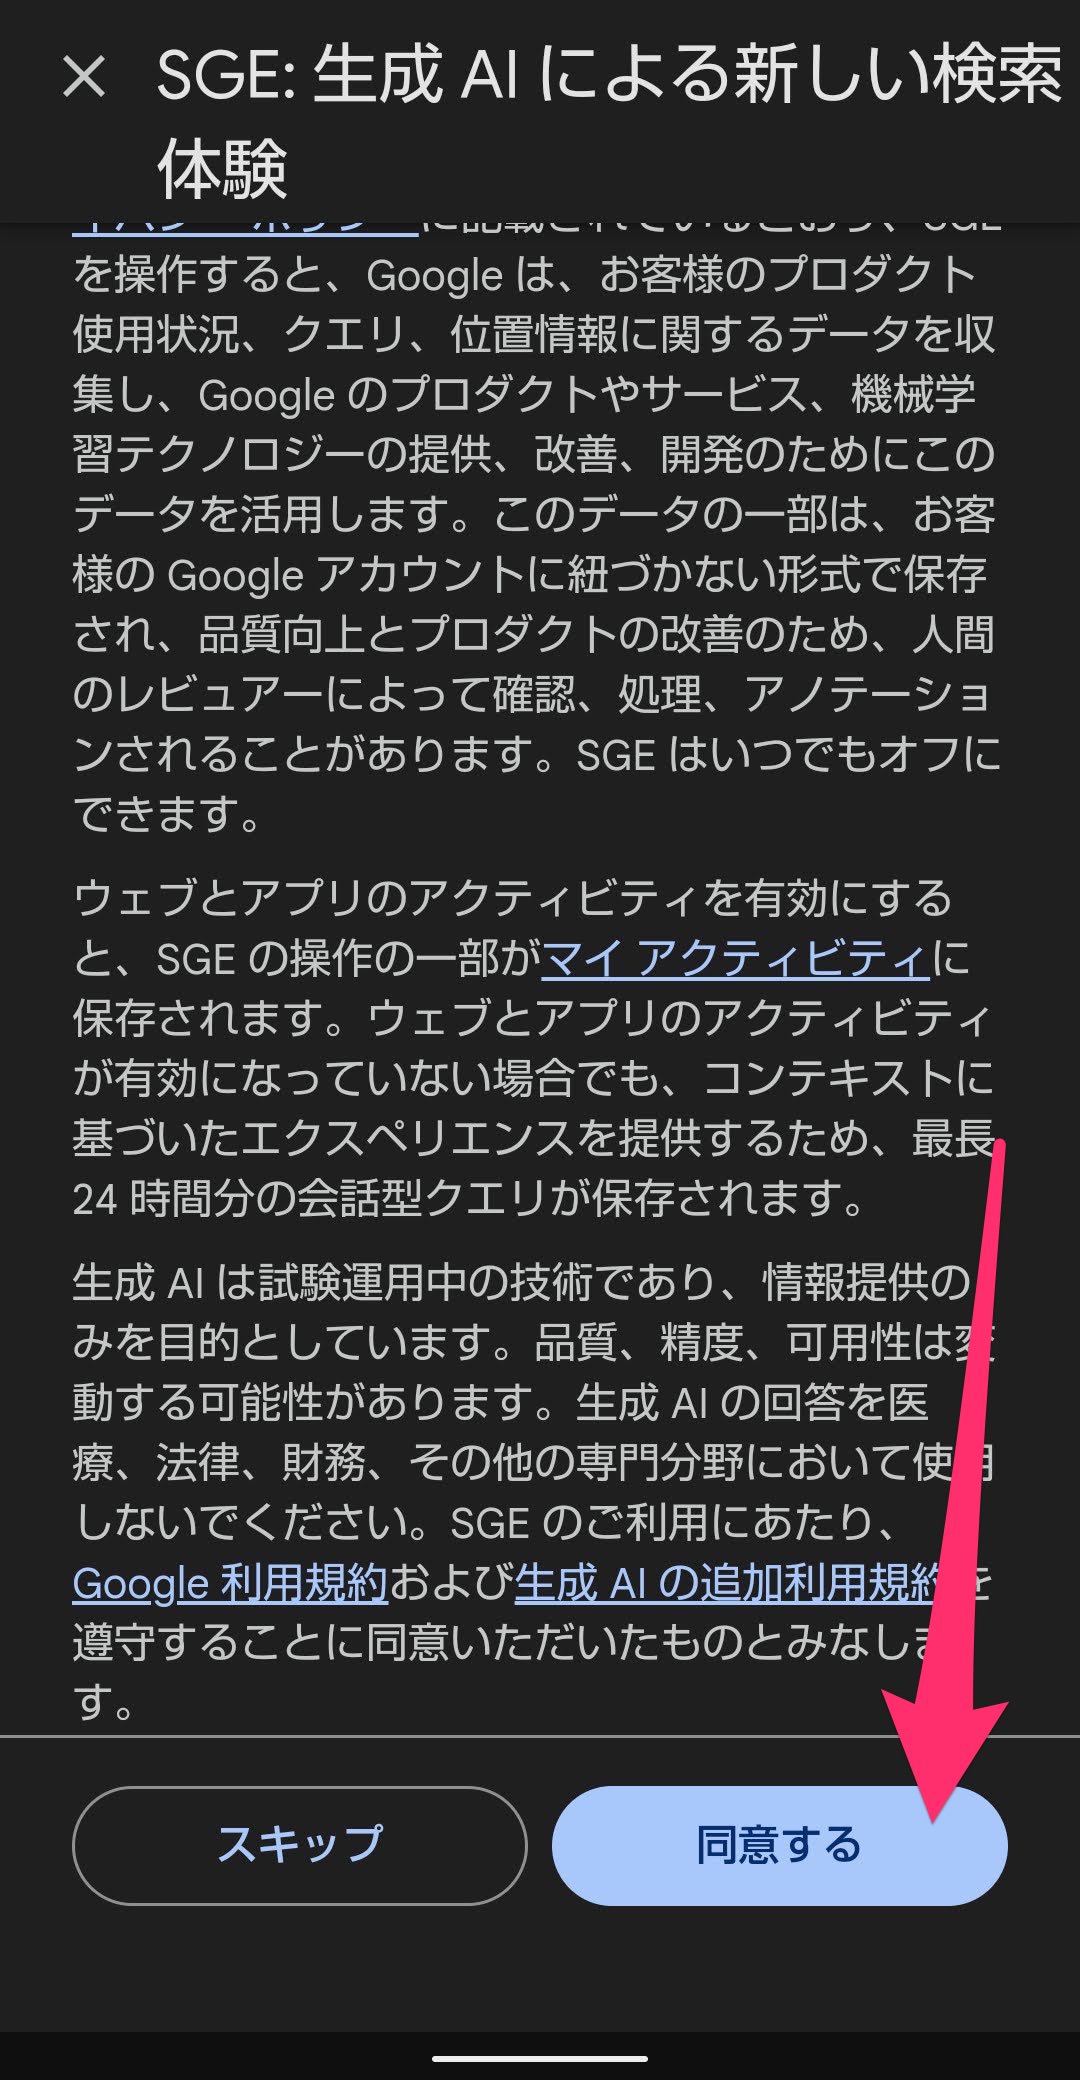 Google Search Labs 利用規約　同意